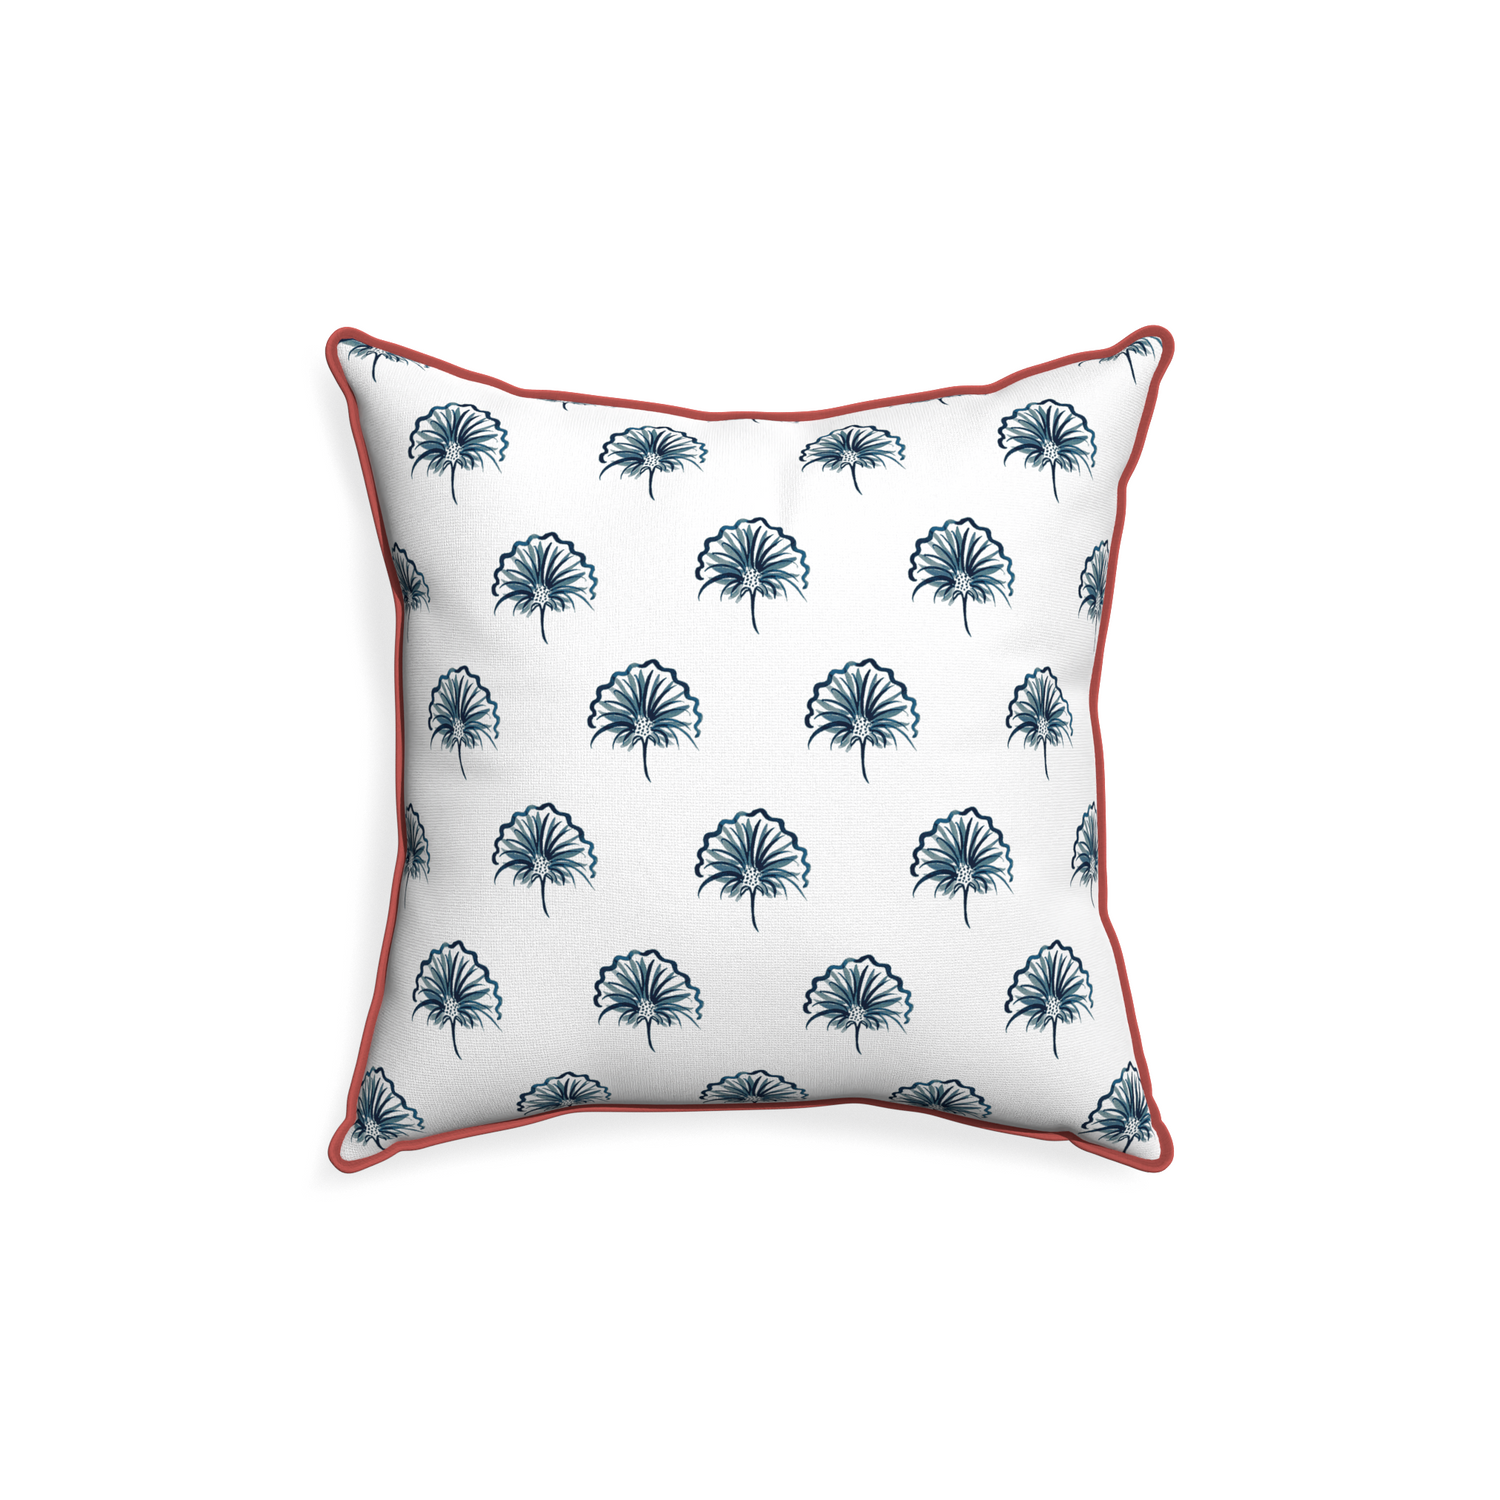 18-square penelope midnight custom pillow with c piping on white background